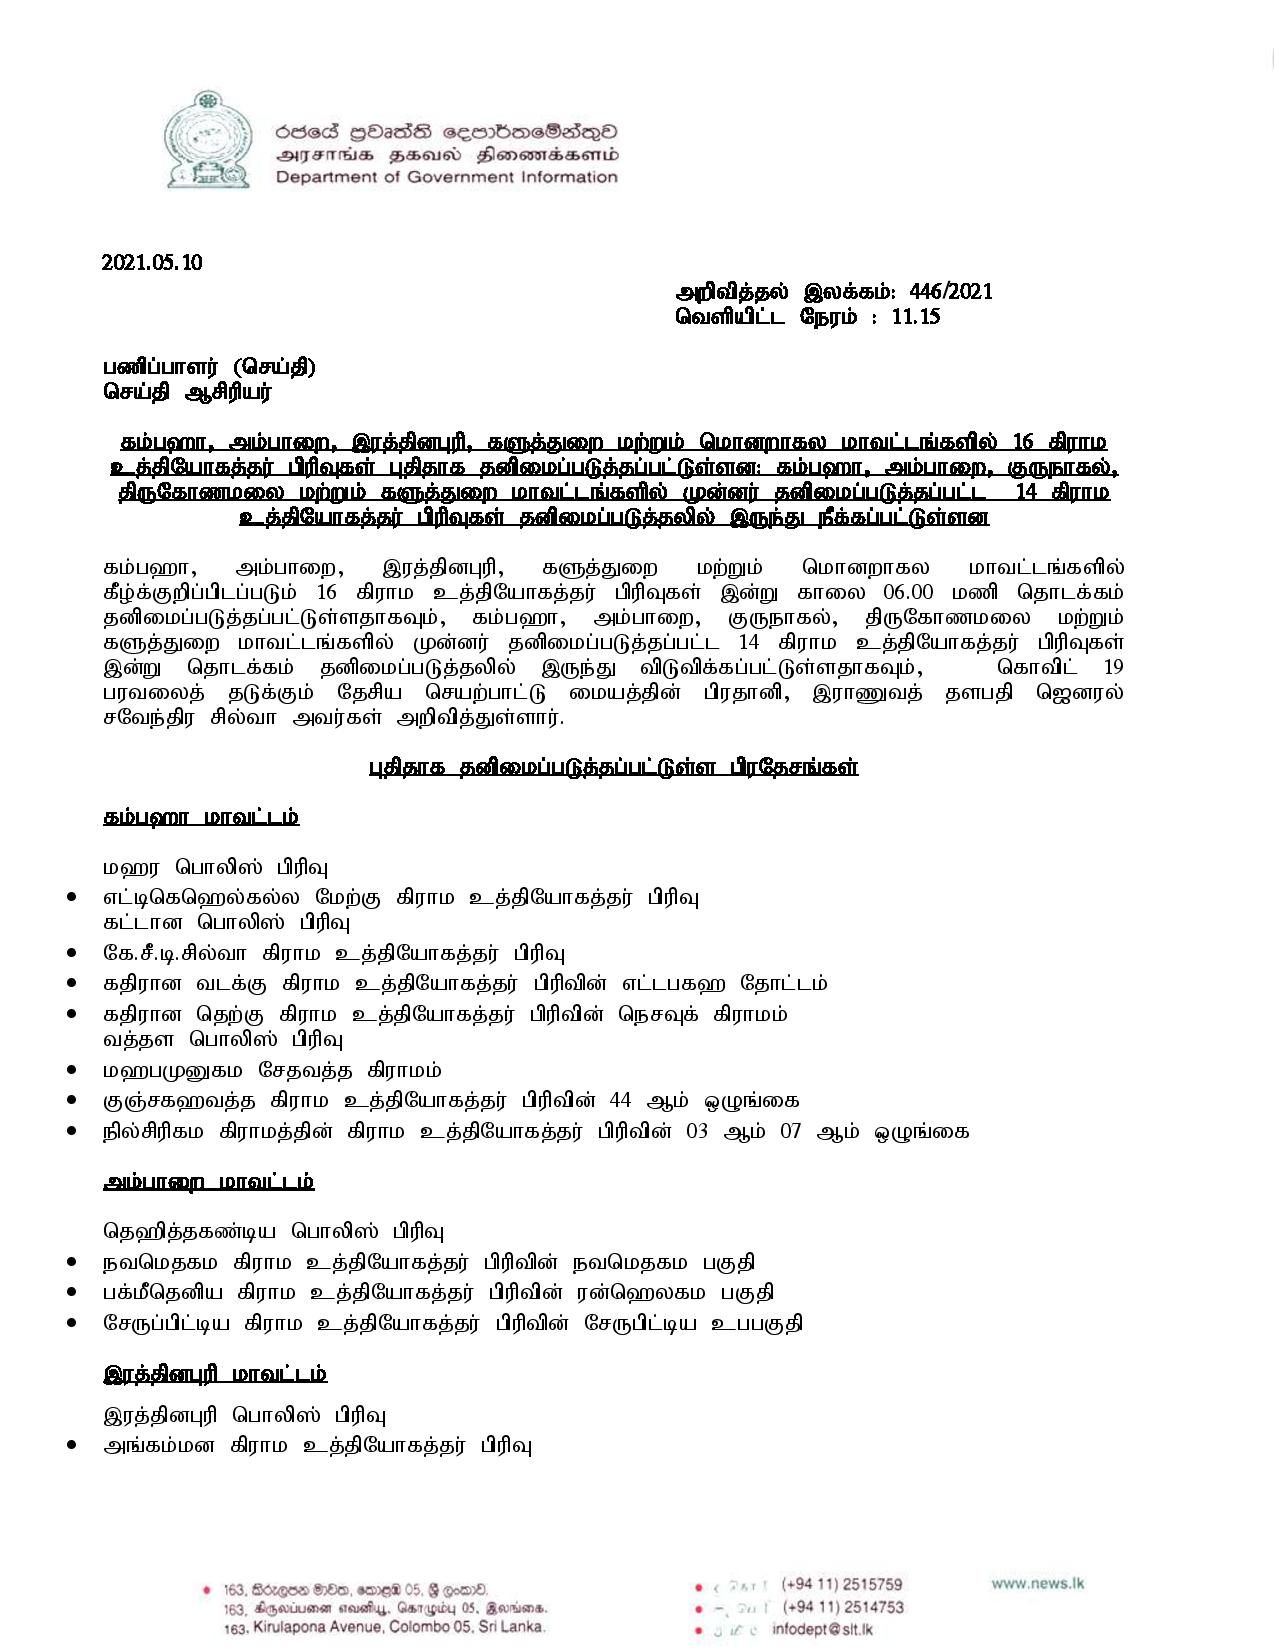 Release No 446 Tamil page 001